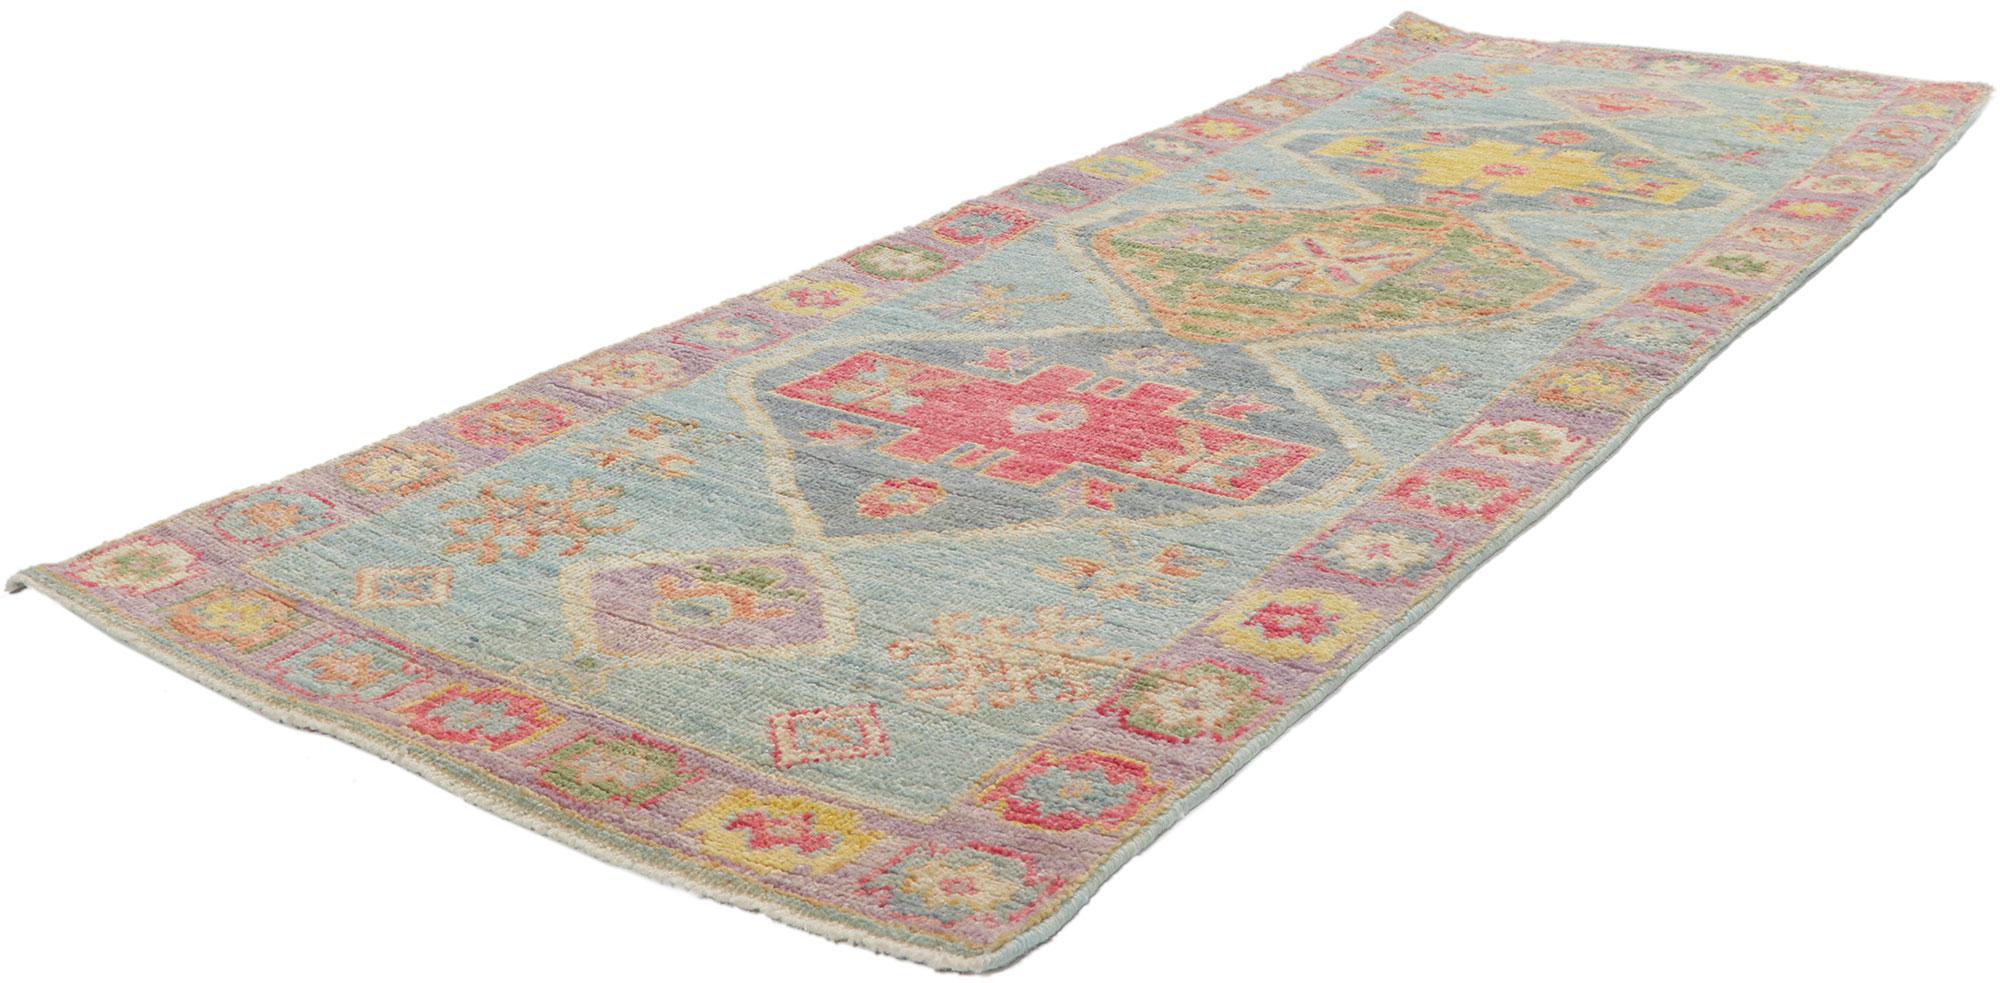 80824 Contemporary Oushak Runner, 02'05 x 06'06. Polished and playful, this hand-knotted wool contemporary Contemporary Oushak runner beautifully embodies a modern style. With elements of comfort, modern style and functional versatility, this Oushak